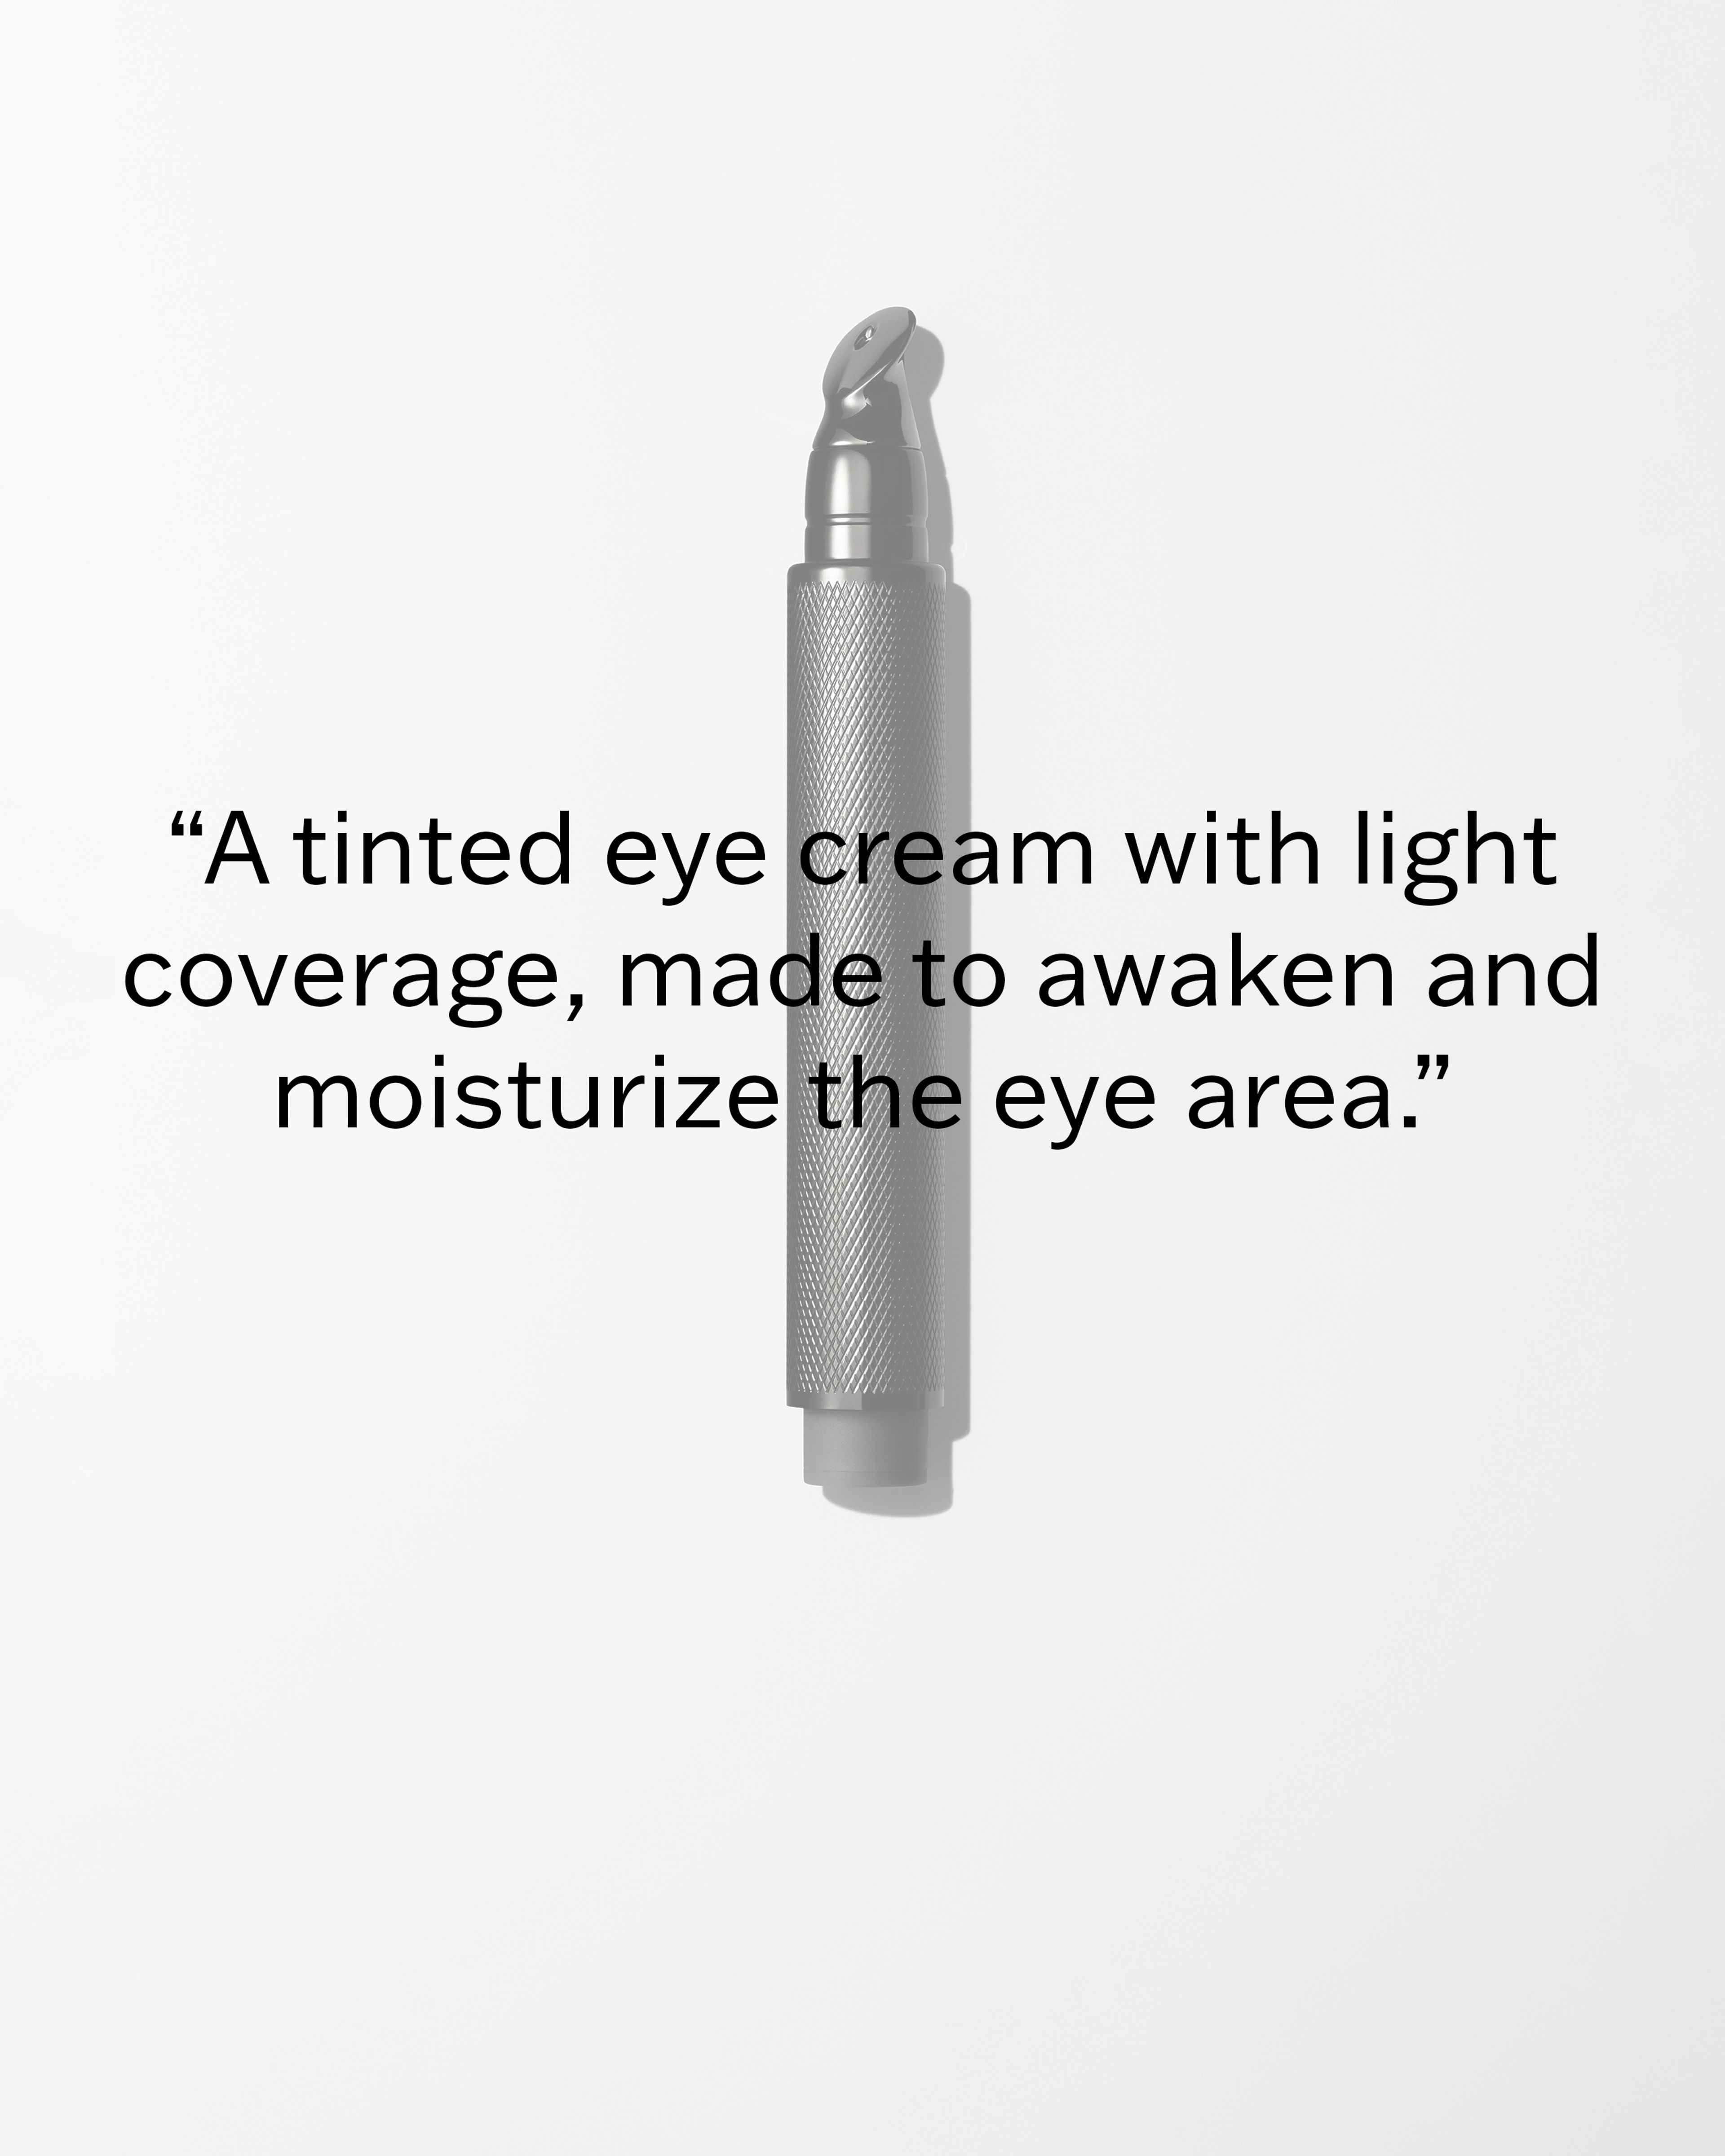 Mens eye cream laying on a grey surface.